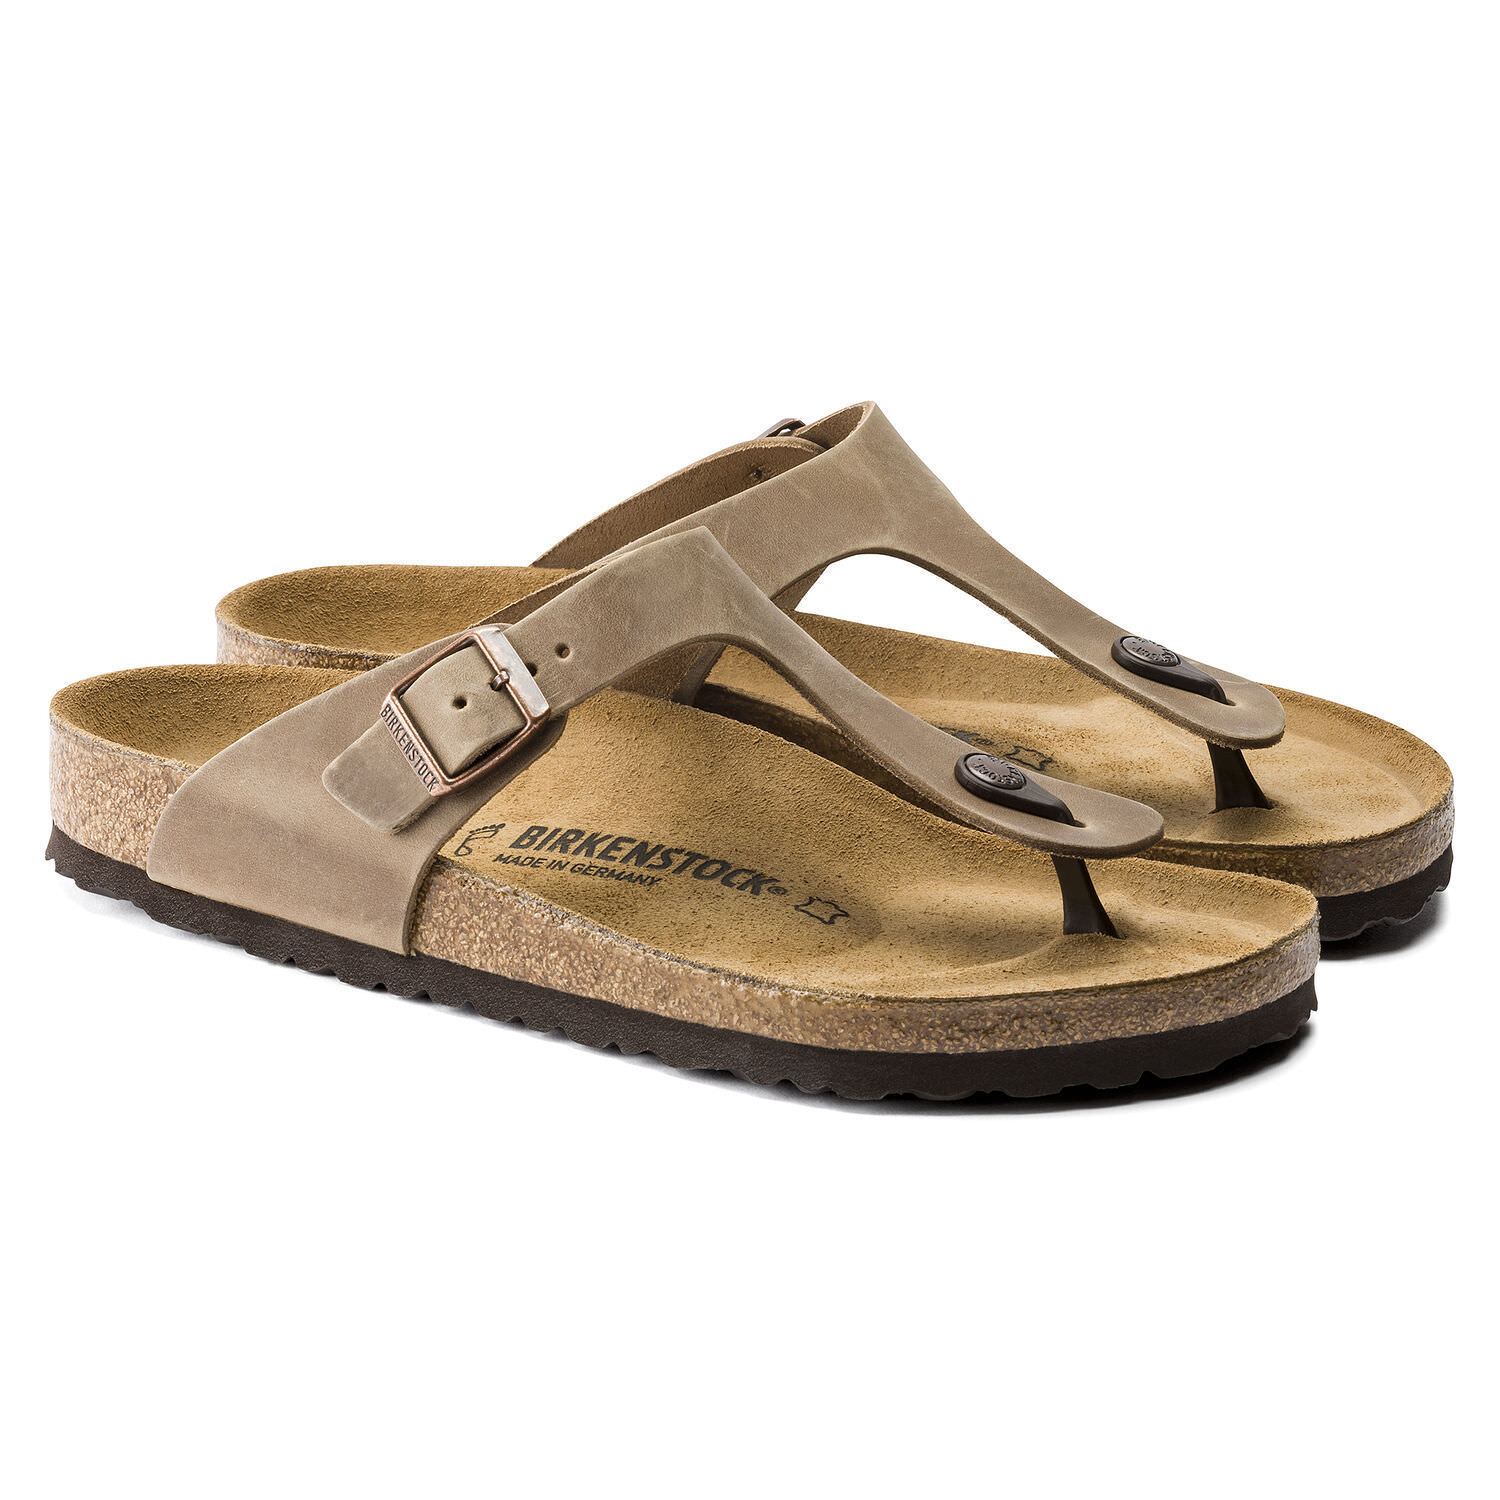 Birkenstock Classic, Gizeh, Natural Leather, Narrow Fit, Tabacco Brown Sandals Birkenstock Classic Tabacco Brown 35 